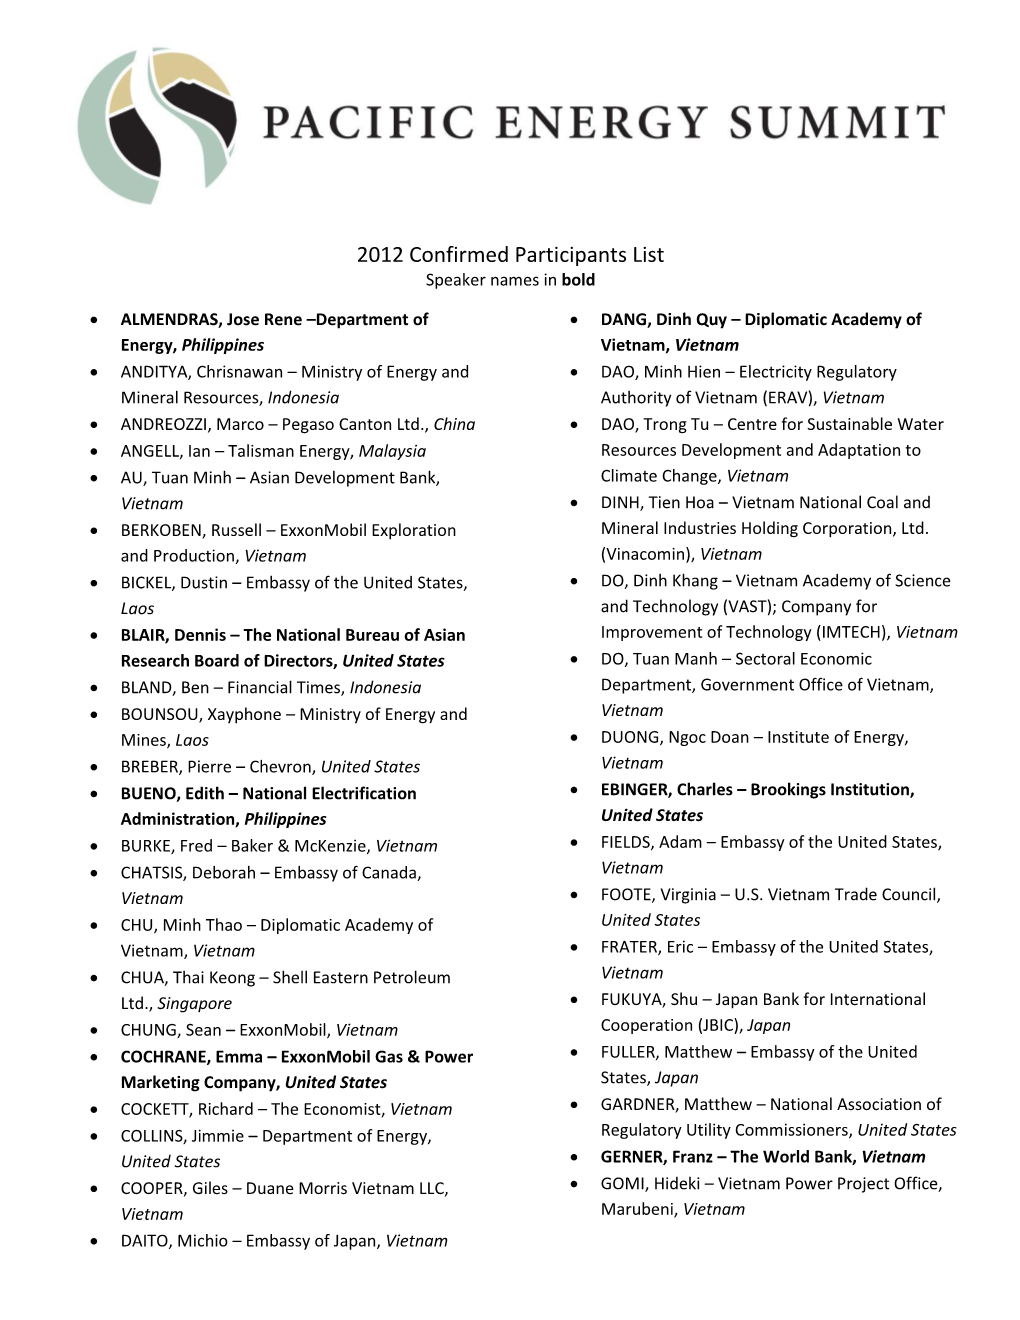 2012 Confirmed Participants List Speaker Names in Bold